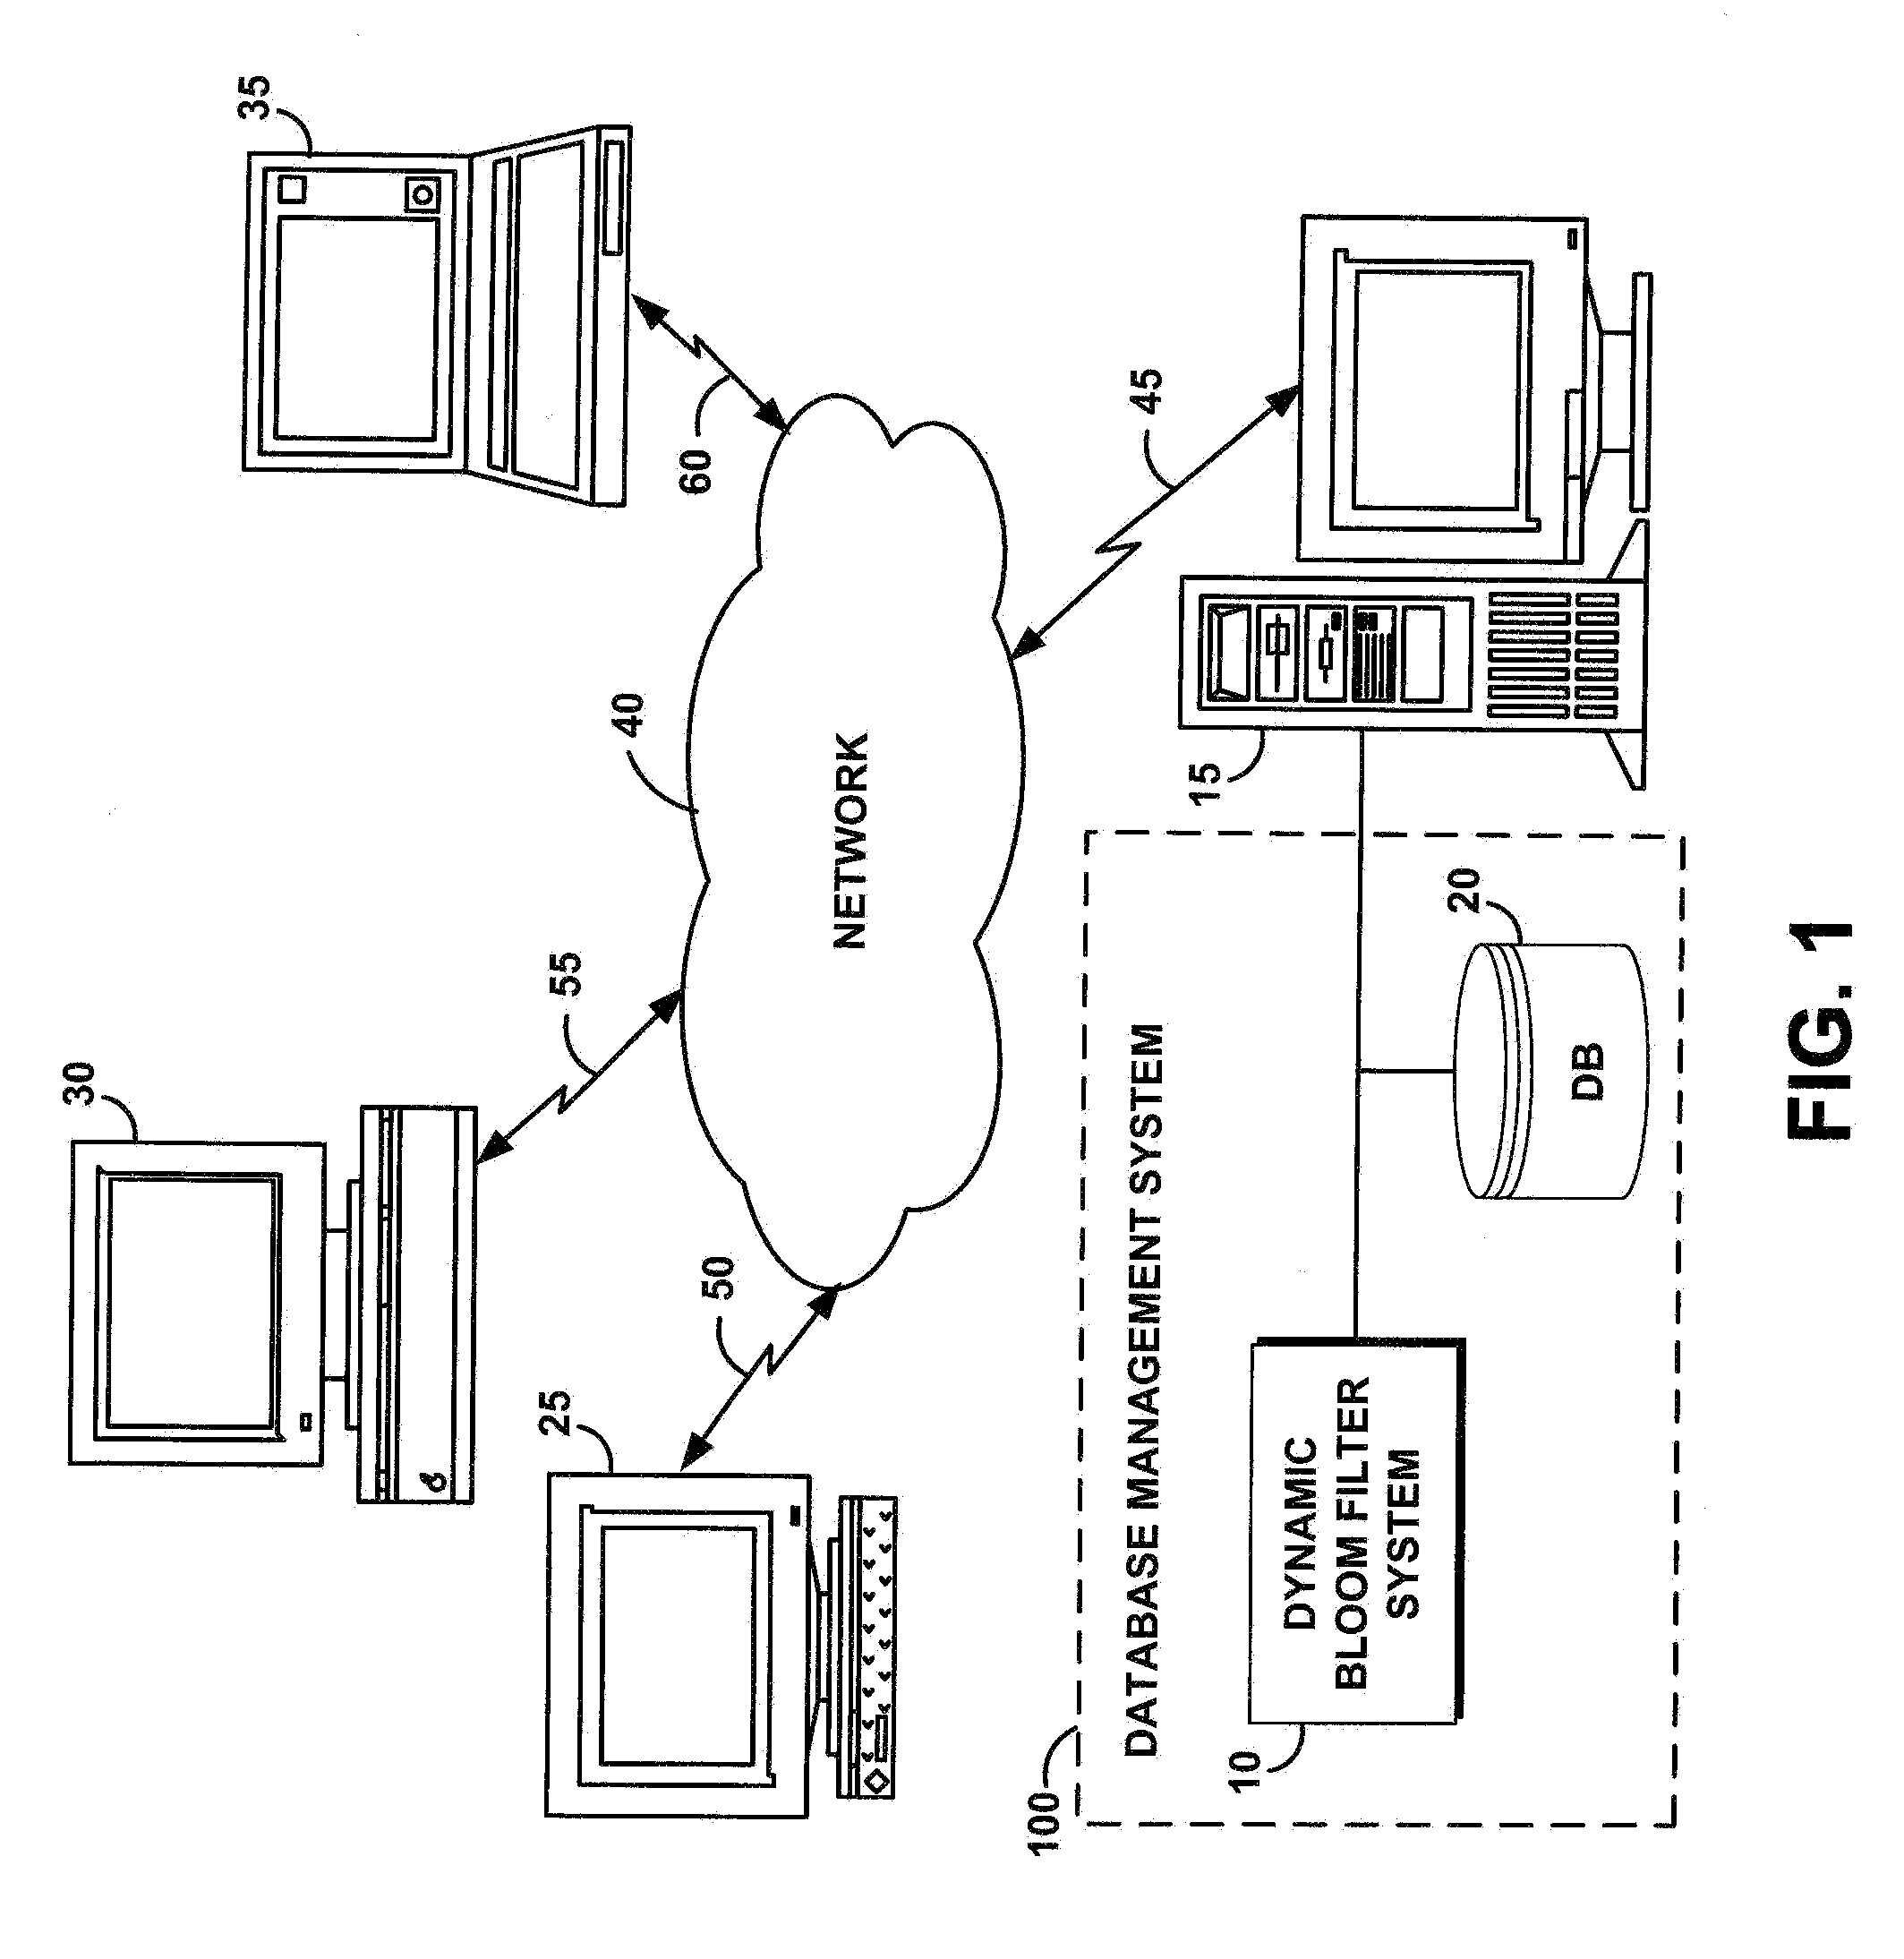 System and method for generating and using a dynamic bloom filter